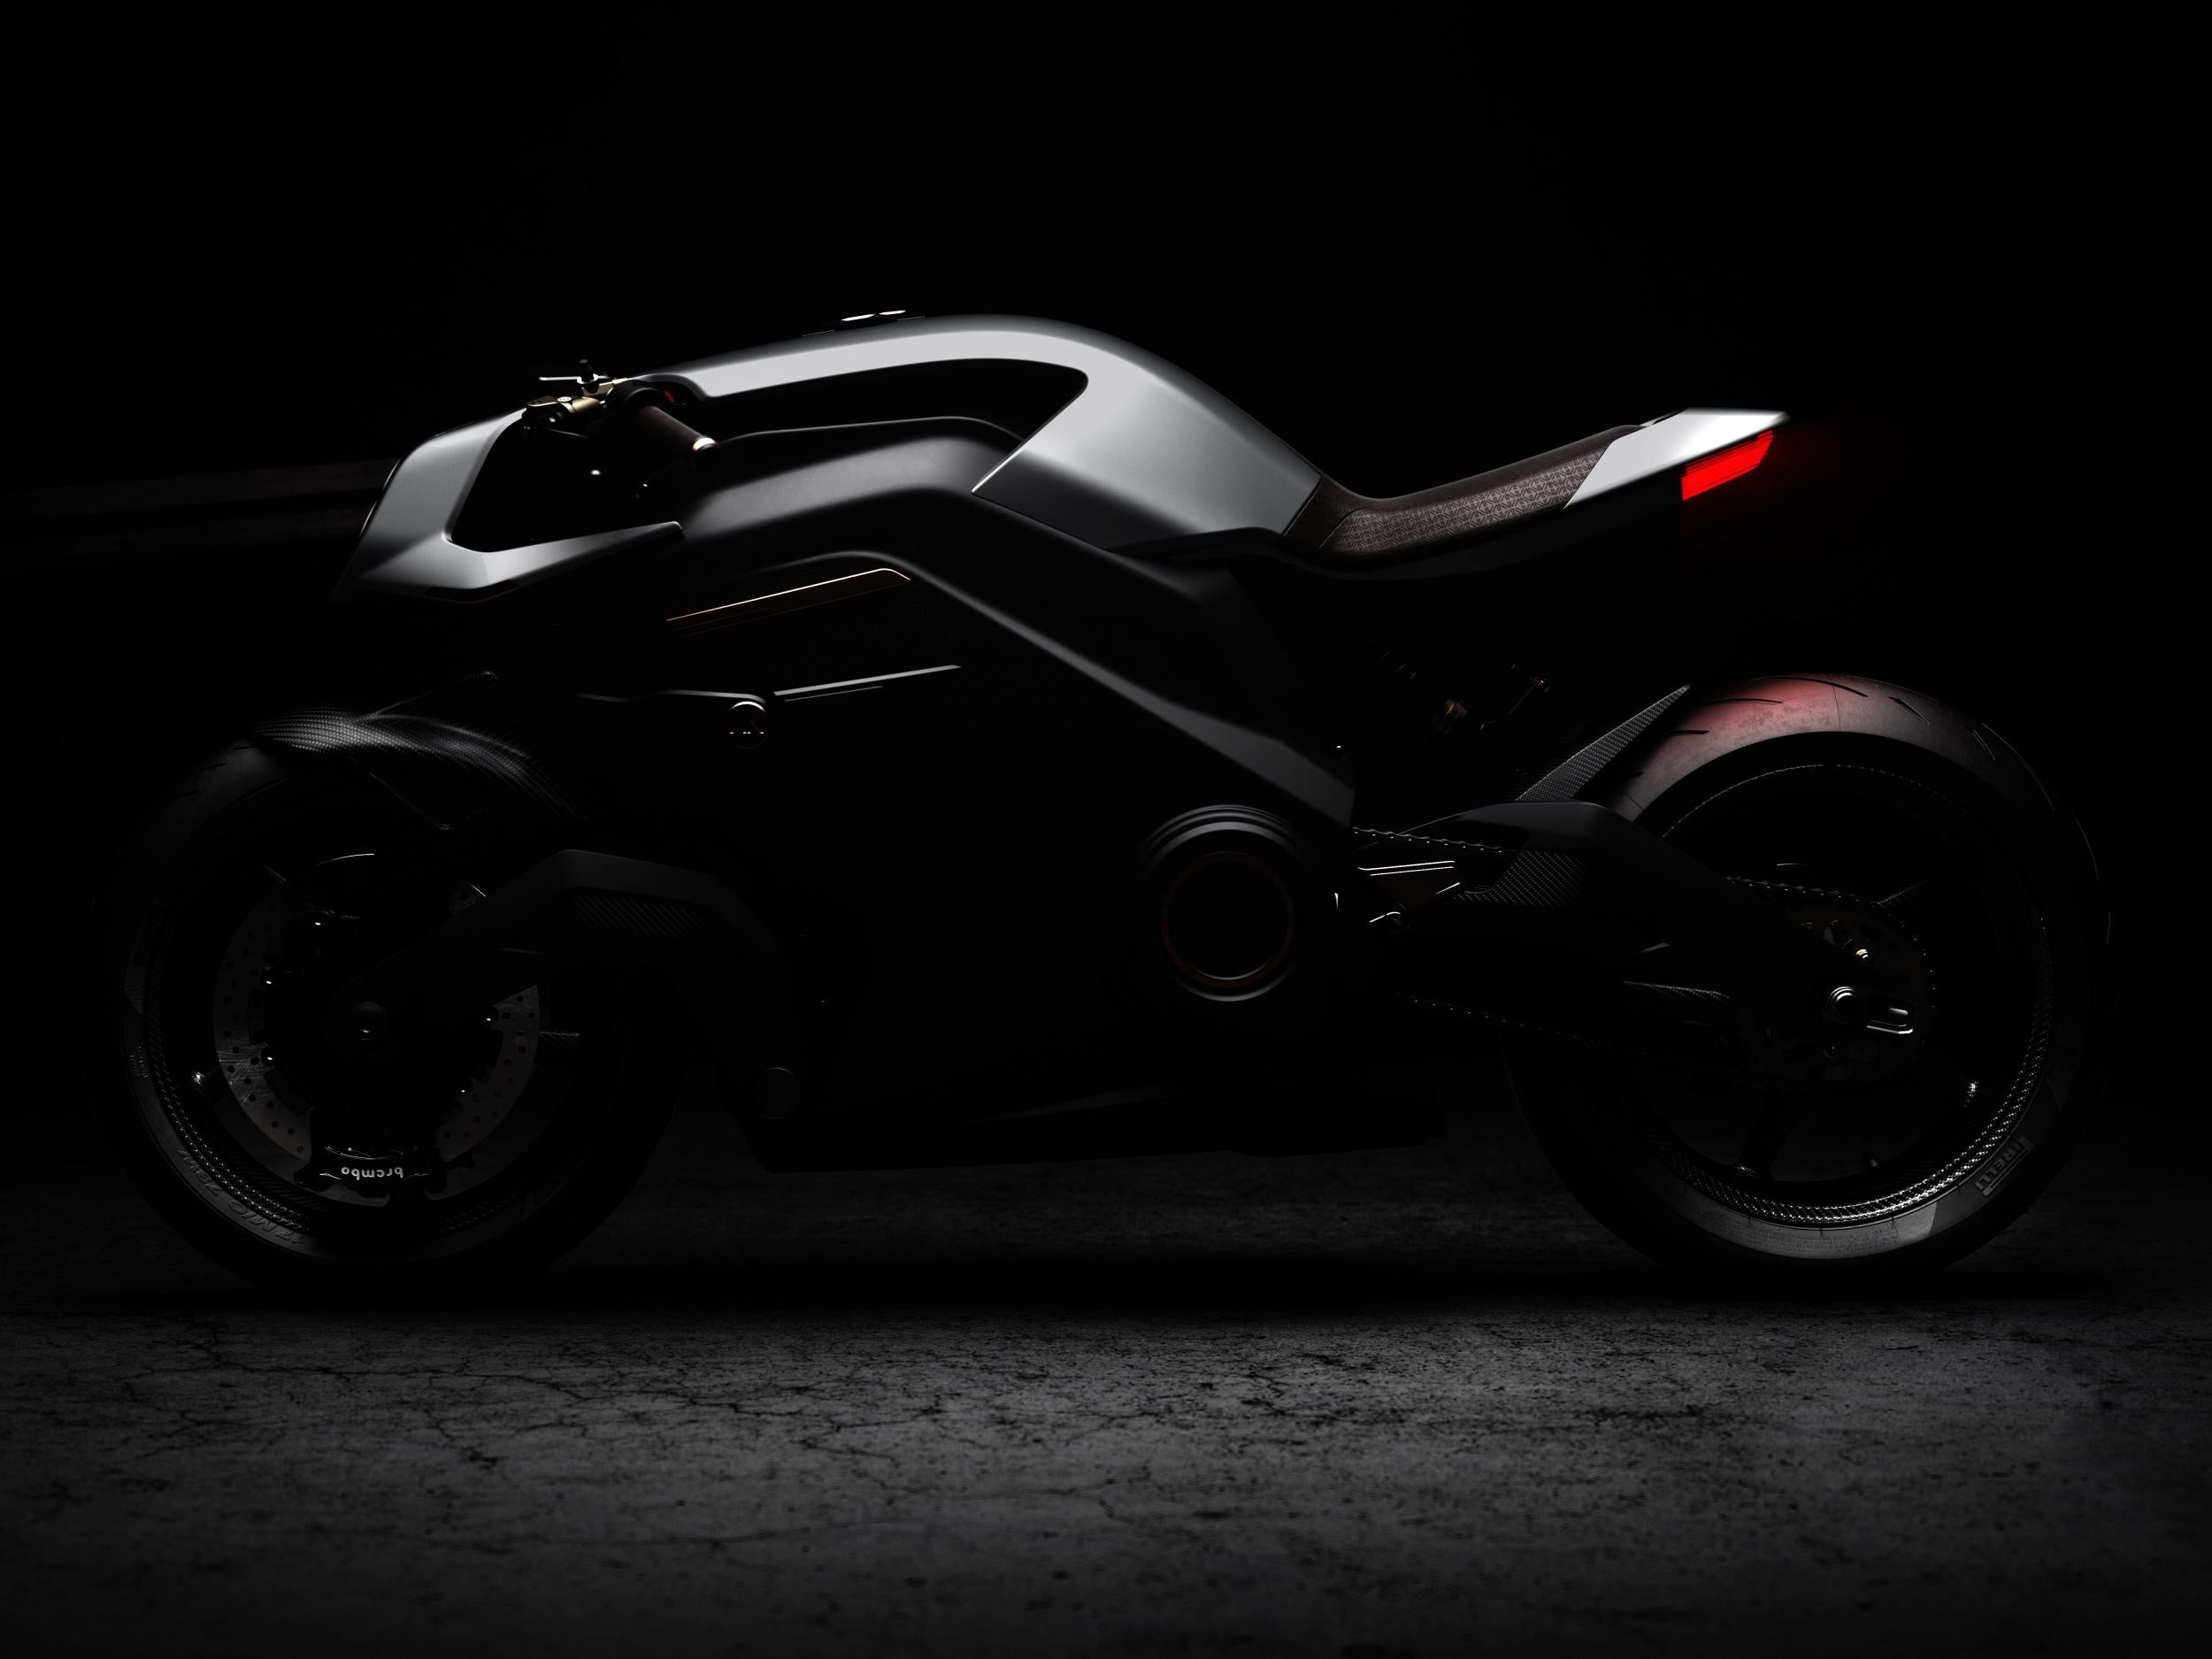 The Arc Vector is priced at £90,000 and features a Human Machine Interface